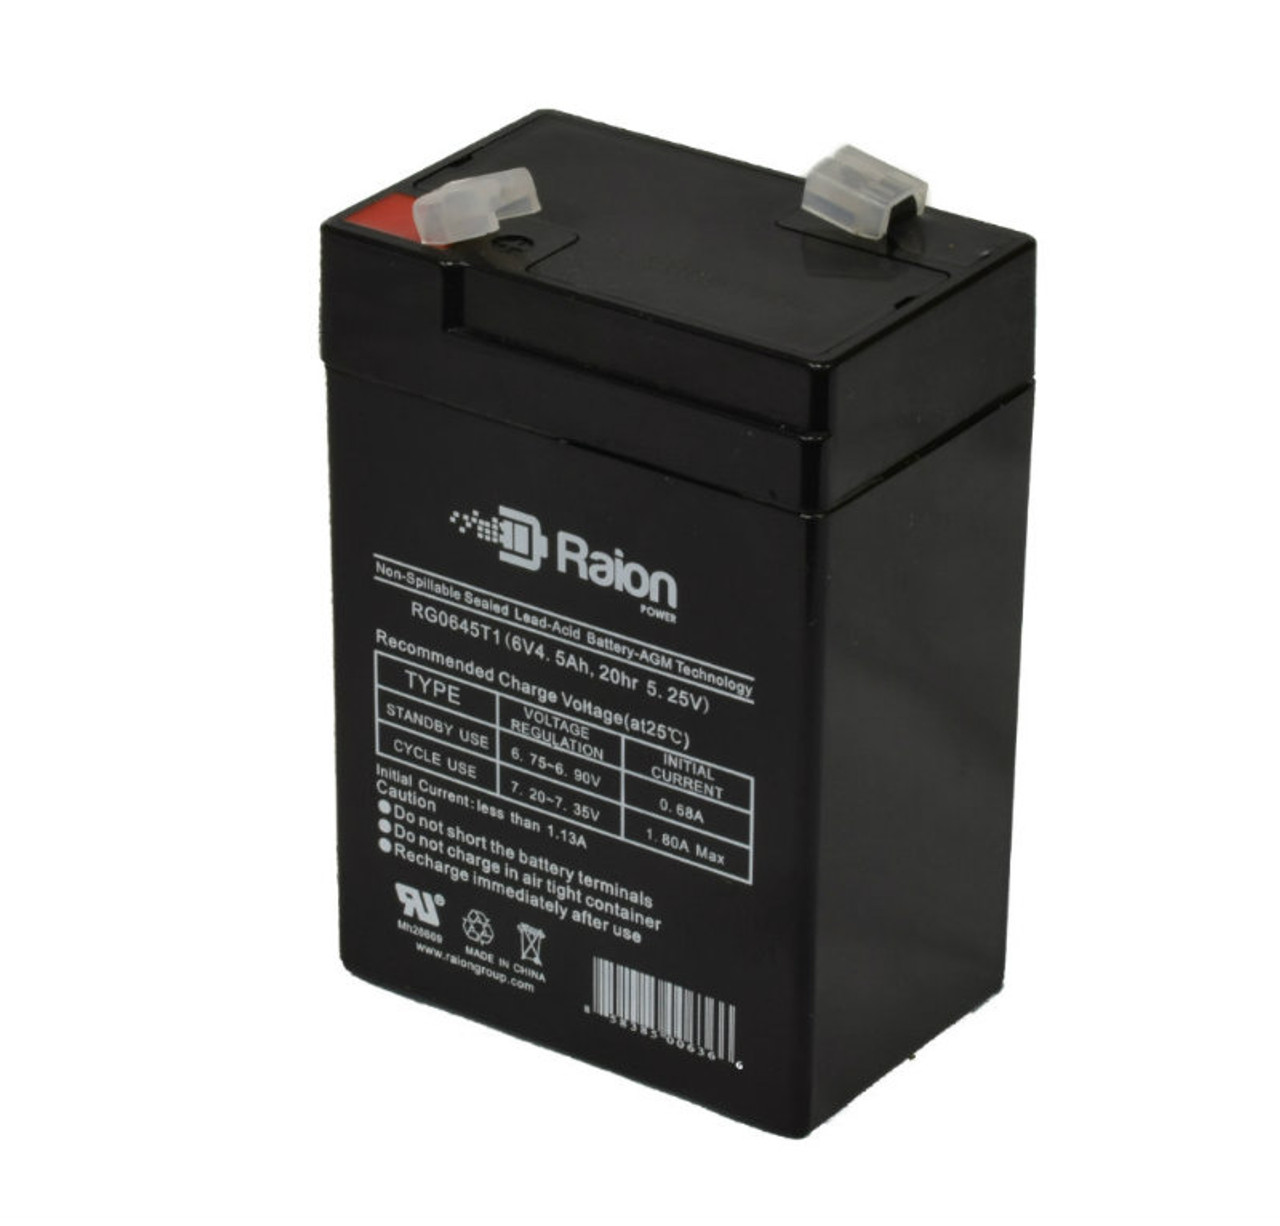 Raion Power RG0645T1 6V 4.5Ah Replacement Battery Cartridge for Universal Power UP4.5-6H